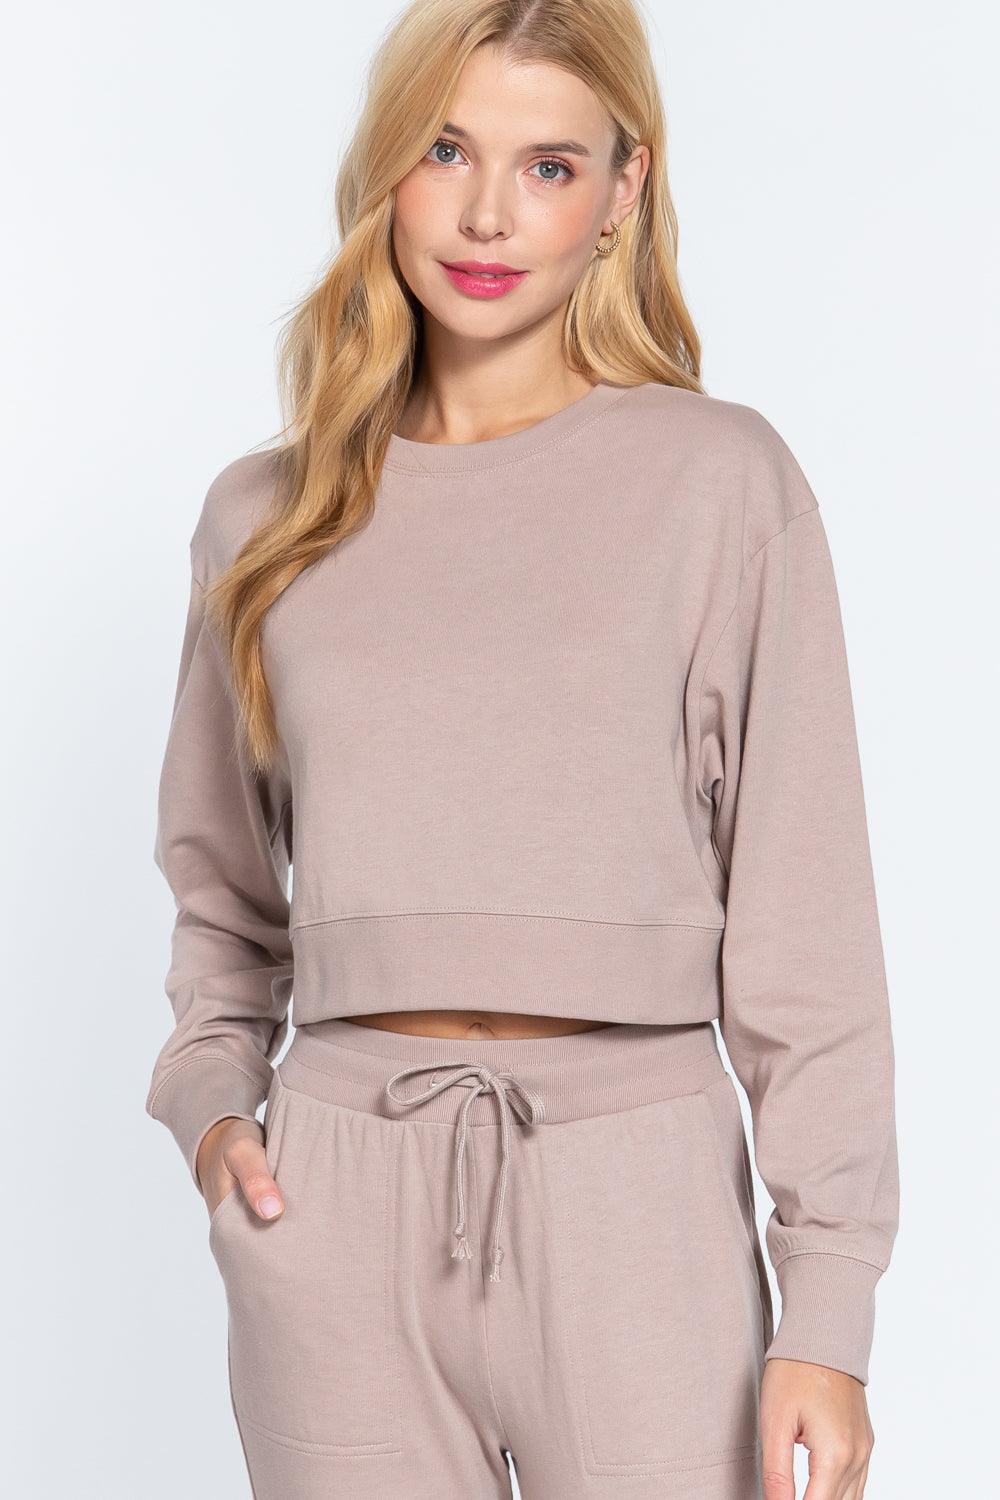 Buying Guide: Stylish and Healthy Dresses 2023 | Fashionably Fit | Long Sleeve Crew Neck Sweatshirt